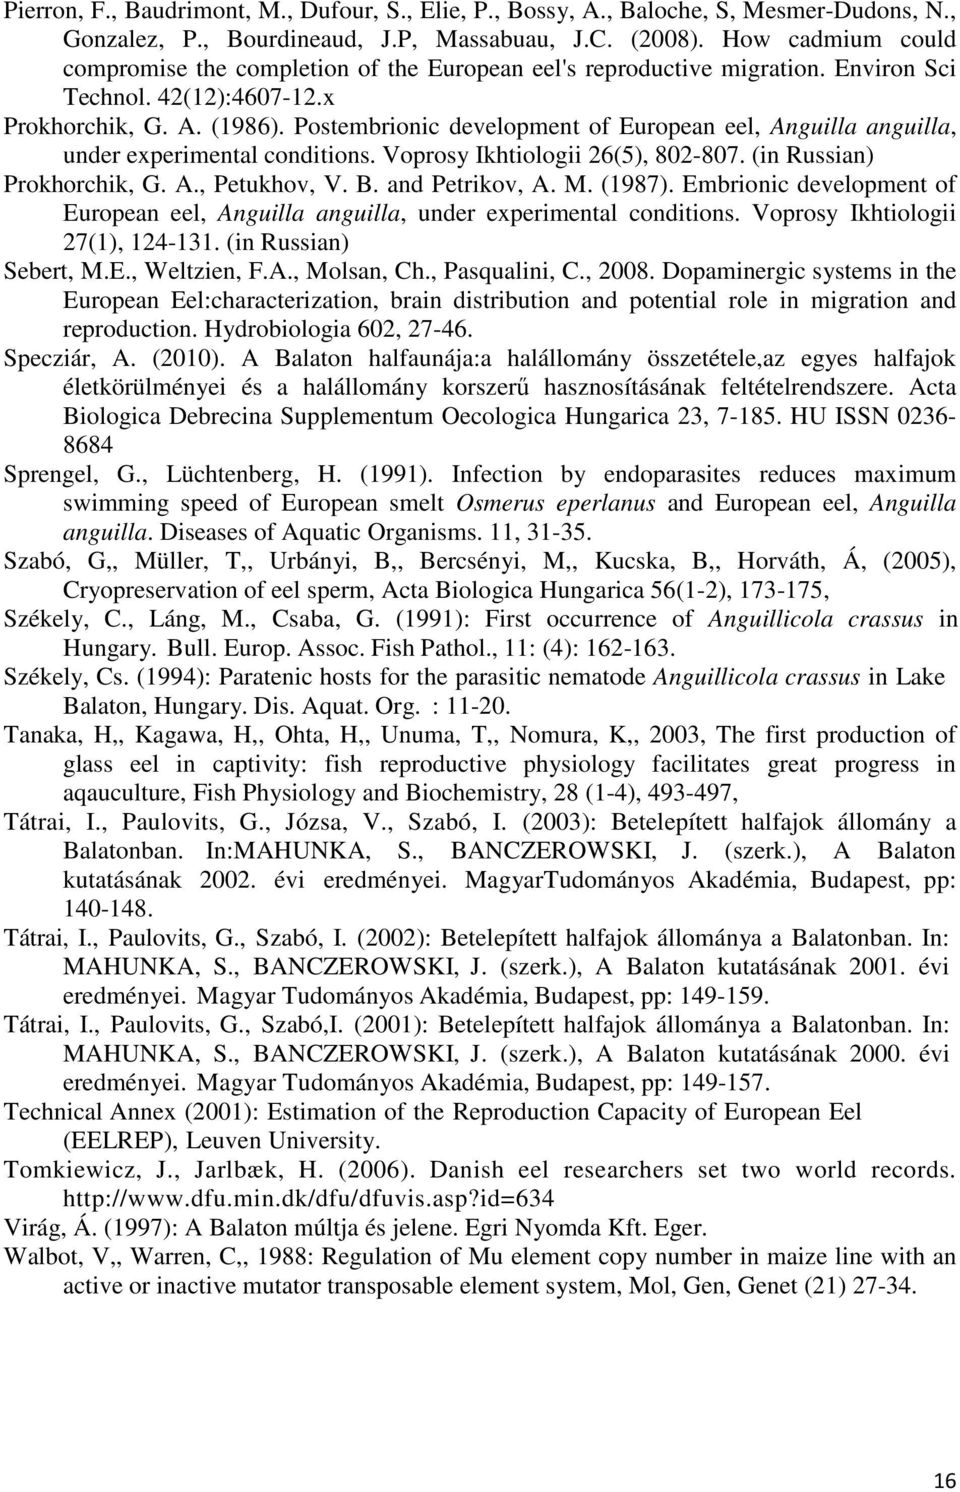 Postembrionic development of European eel, Anguilla anguilla, under experimental conditions. Voprosy Ikhtiologii 26(5), 802-807. (in Russian) Prokhorchik, G. A., Petukhov, V. B. and Petrikov, A. M.